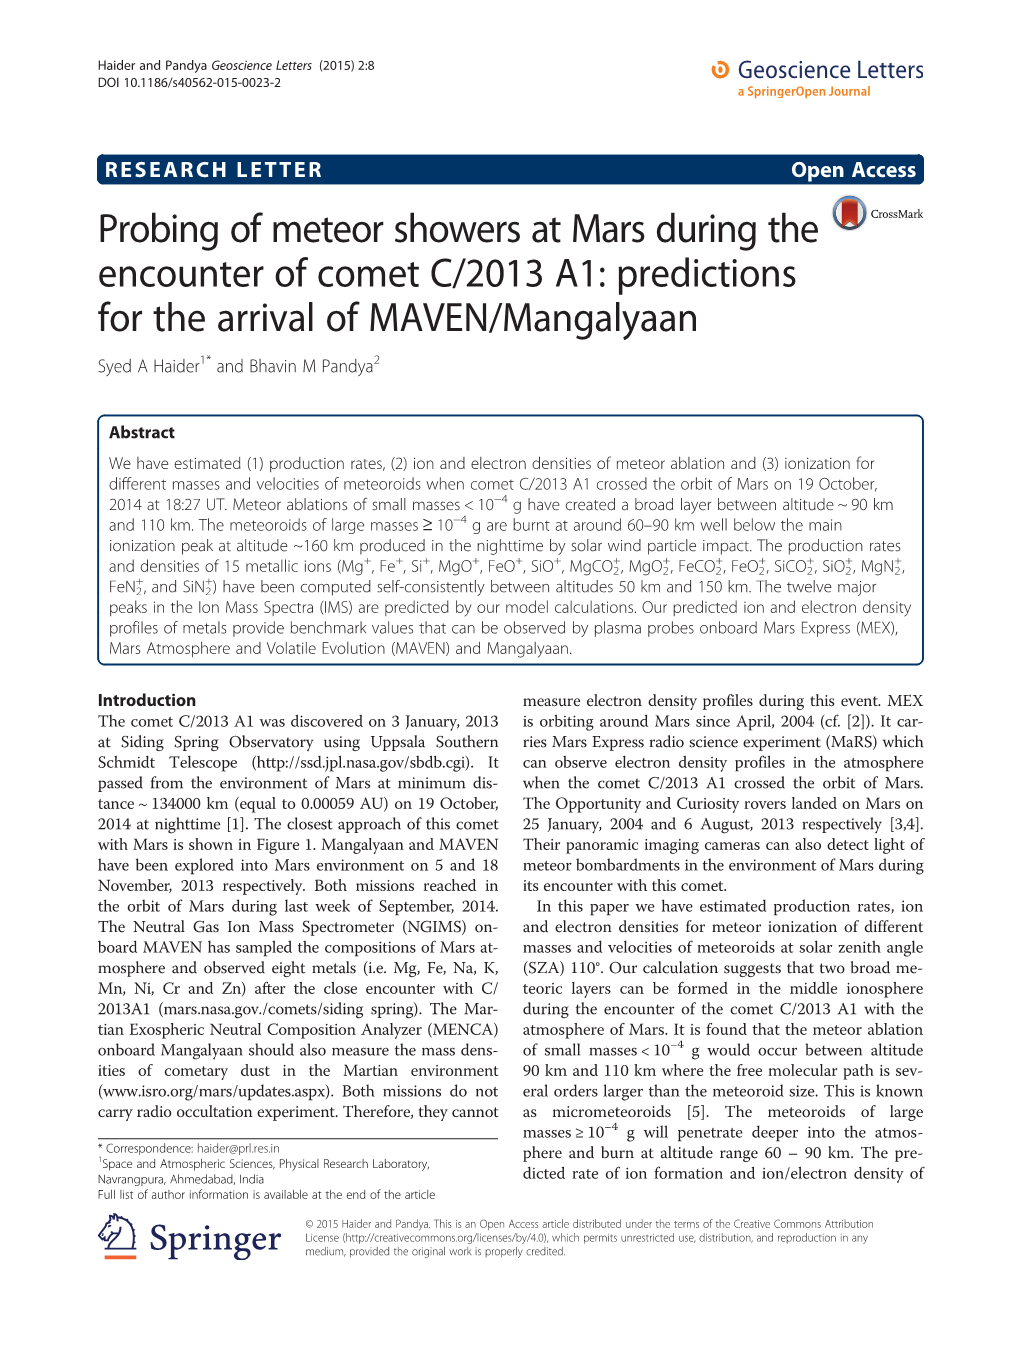 Probing of Meteor Showers at Mars During the Encounter of Comet C/2013 A1: Predictions for the Arrival of MAVEN/Mangalyaan Syed a Haider1* and Bhavin M Pandya2